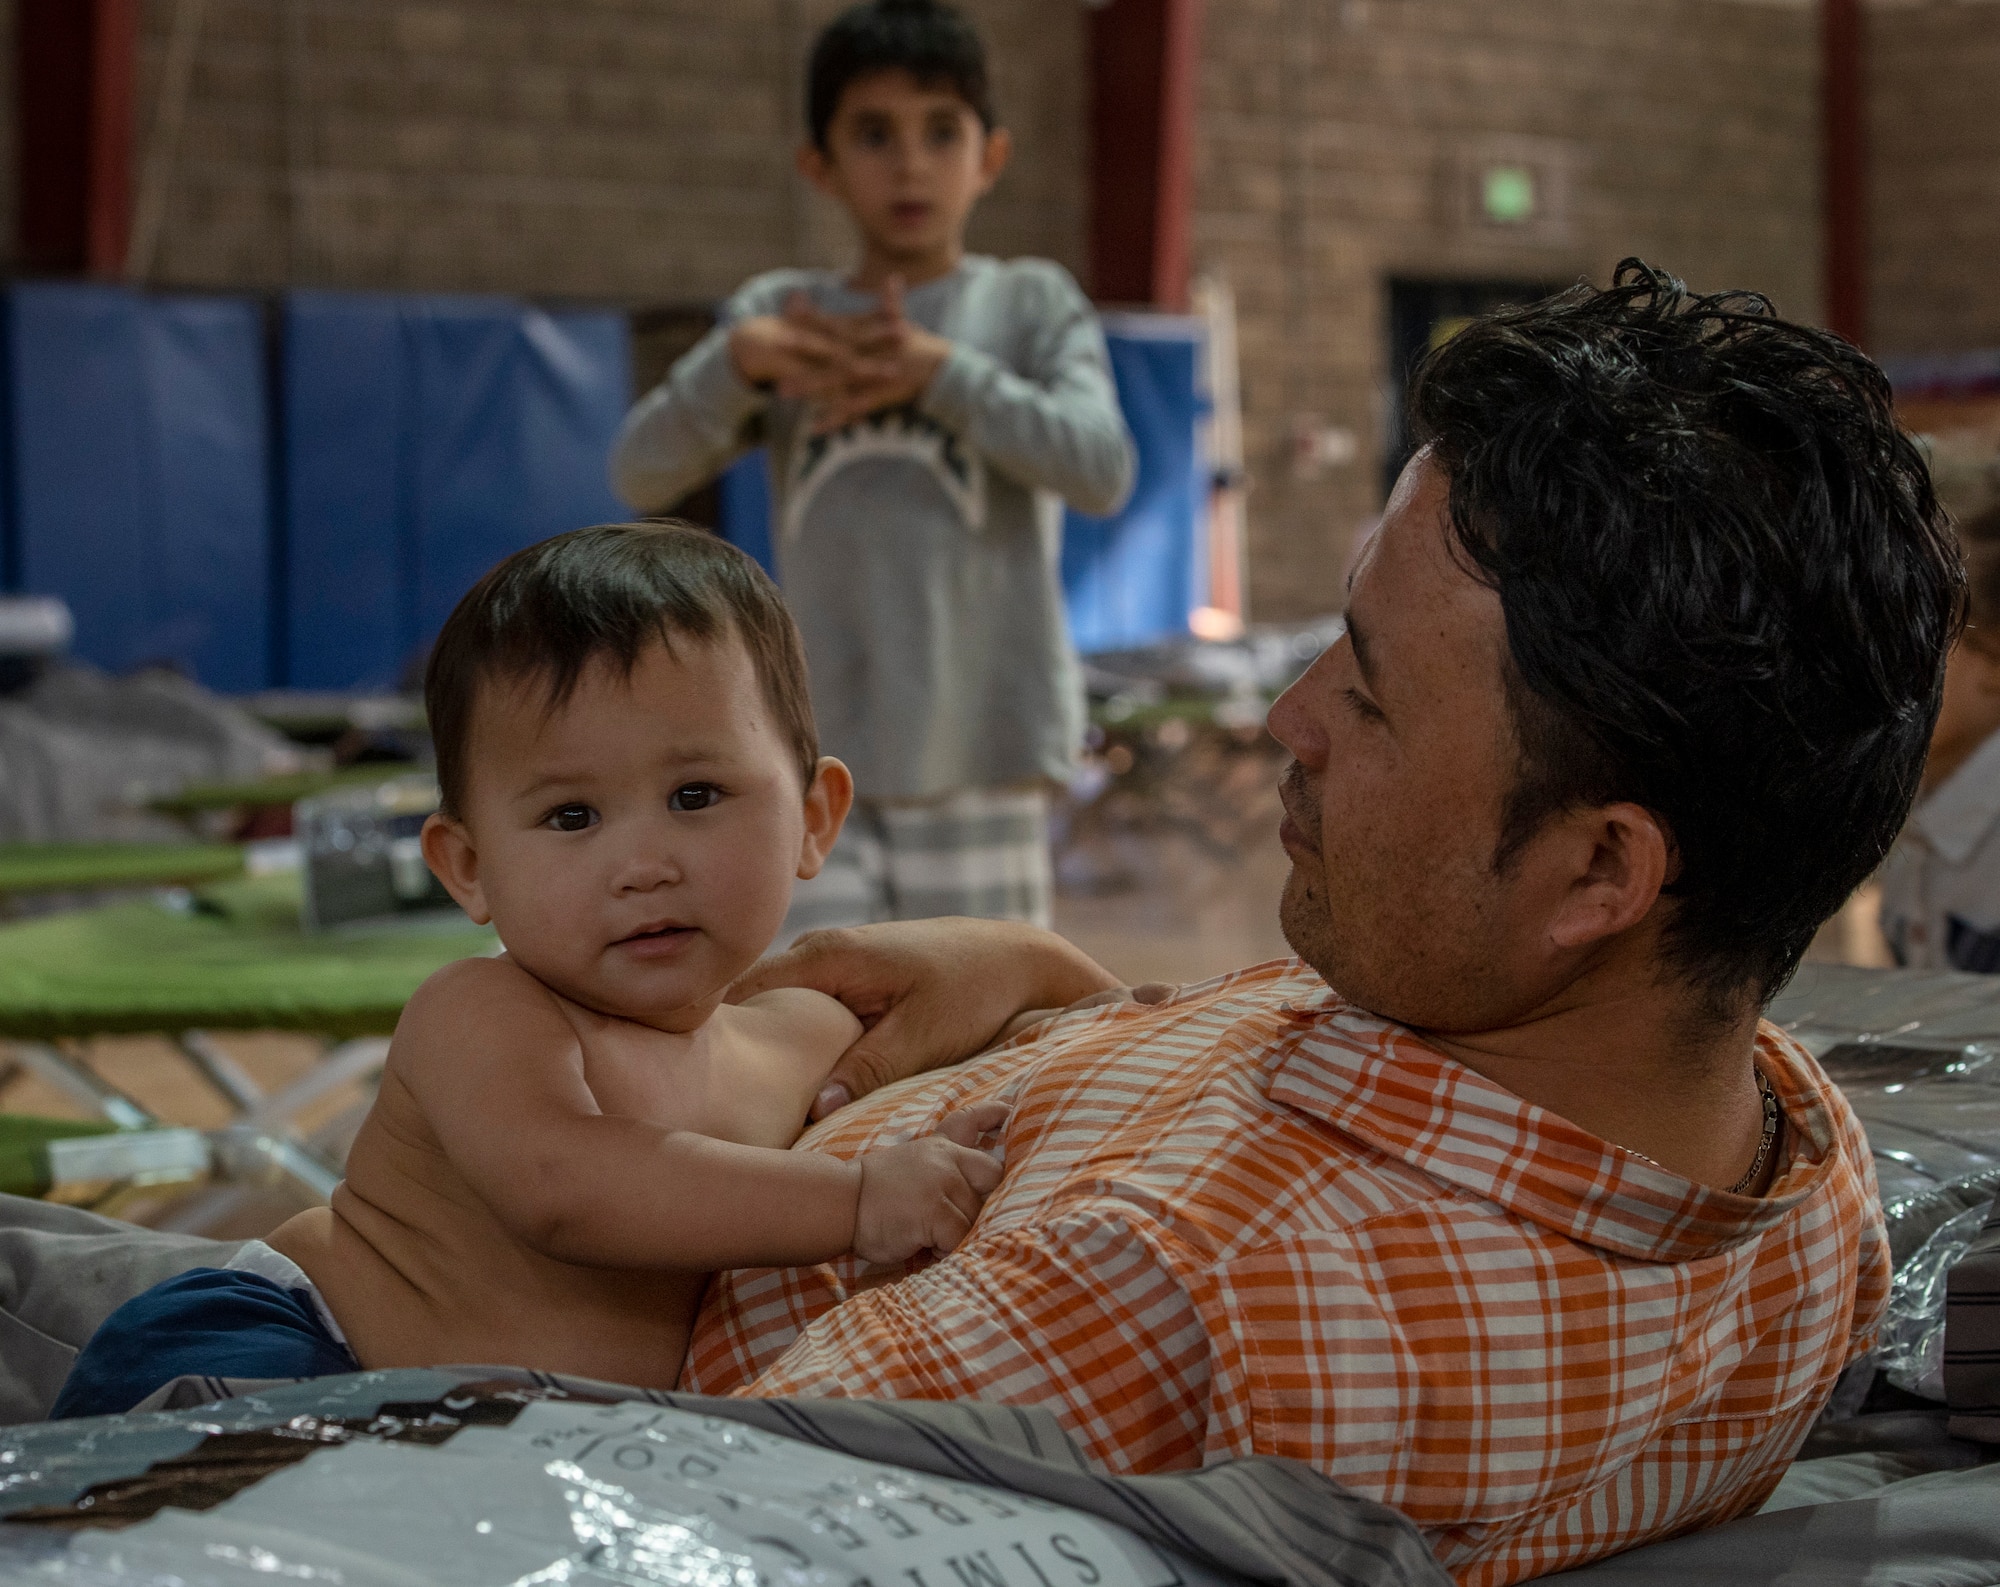 A qualified evacuee lays with his son at a gym in the CENTCOM region, Aug. 20, 2021.